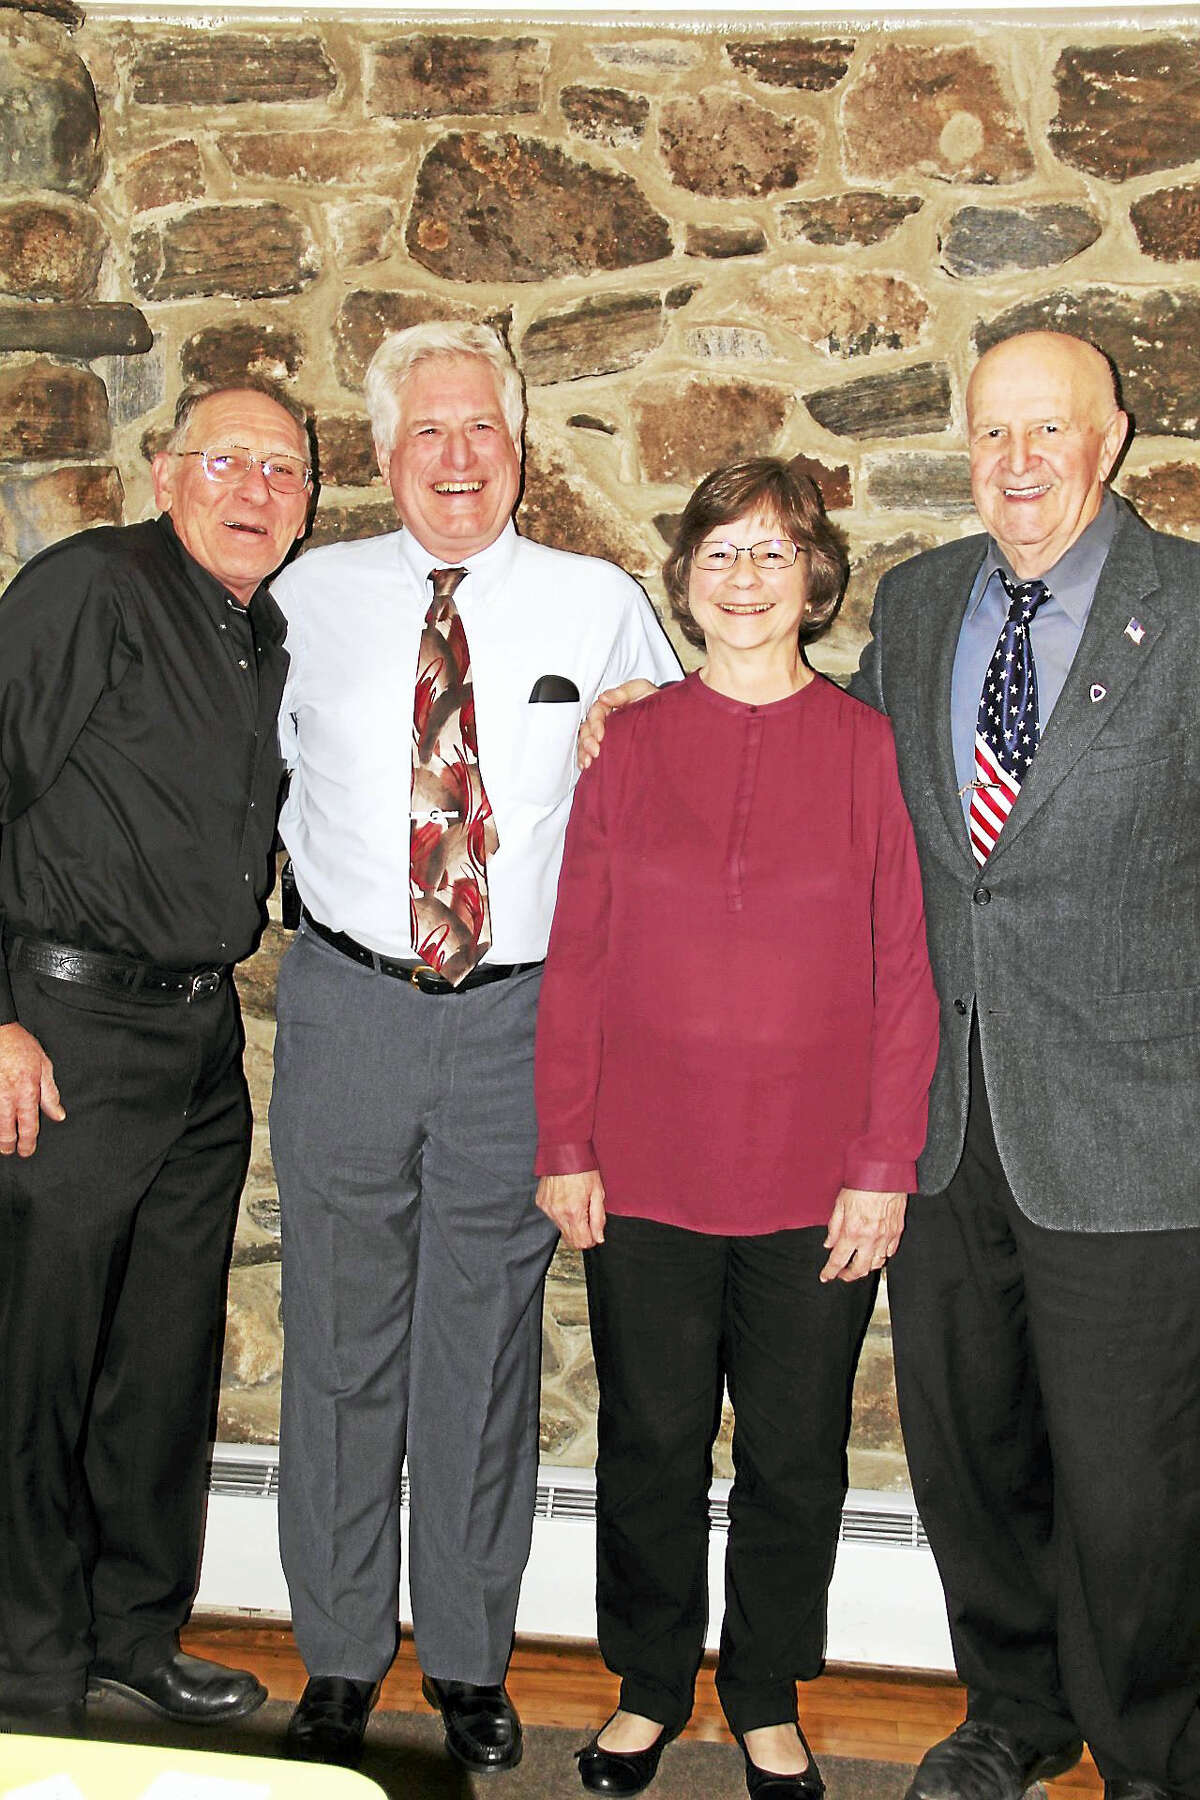 Photo by Anita Garnett From left are award recipients Art Melchyer, Peter and Noreen Marchand and Moe Gabelmann.